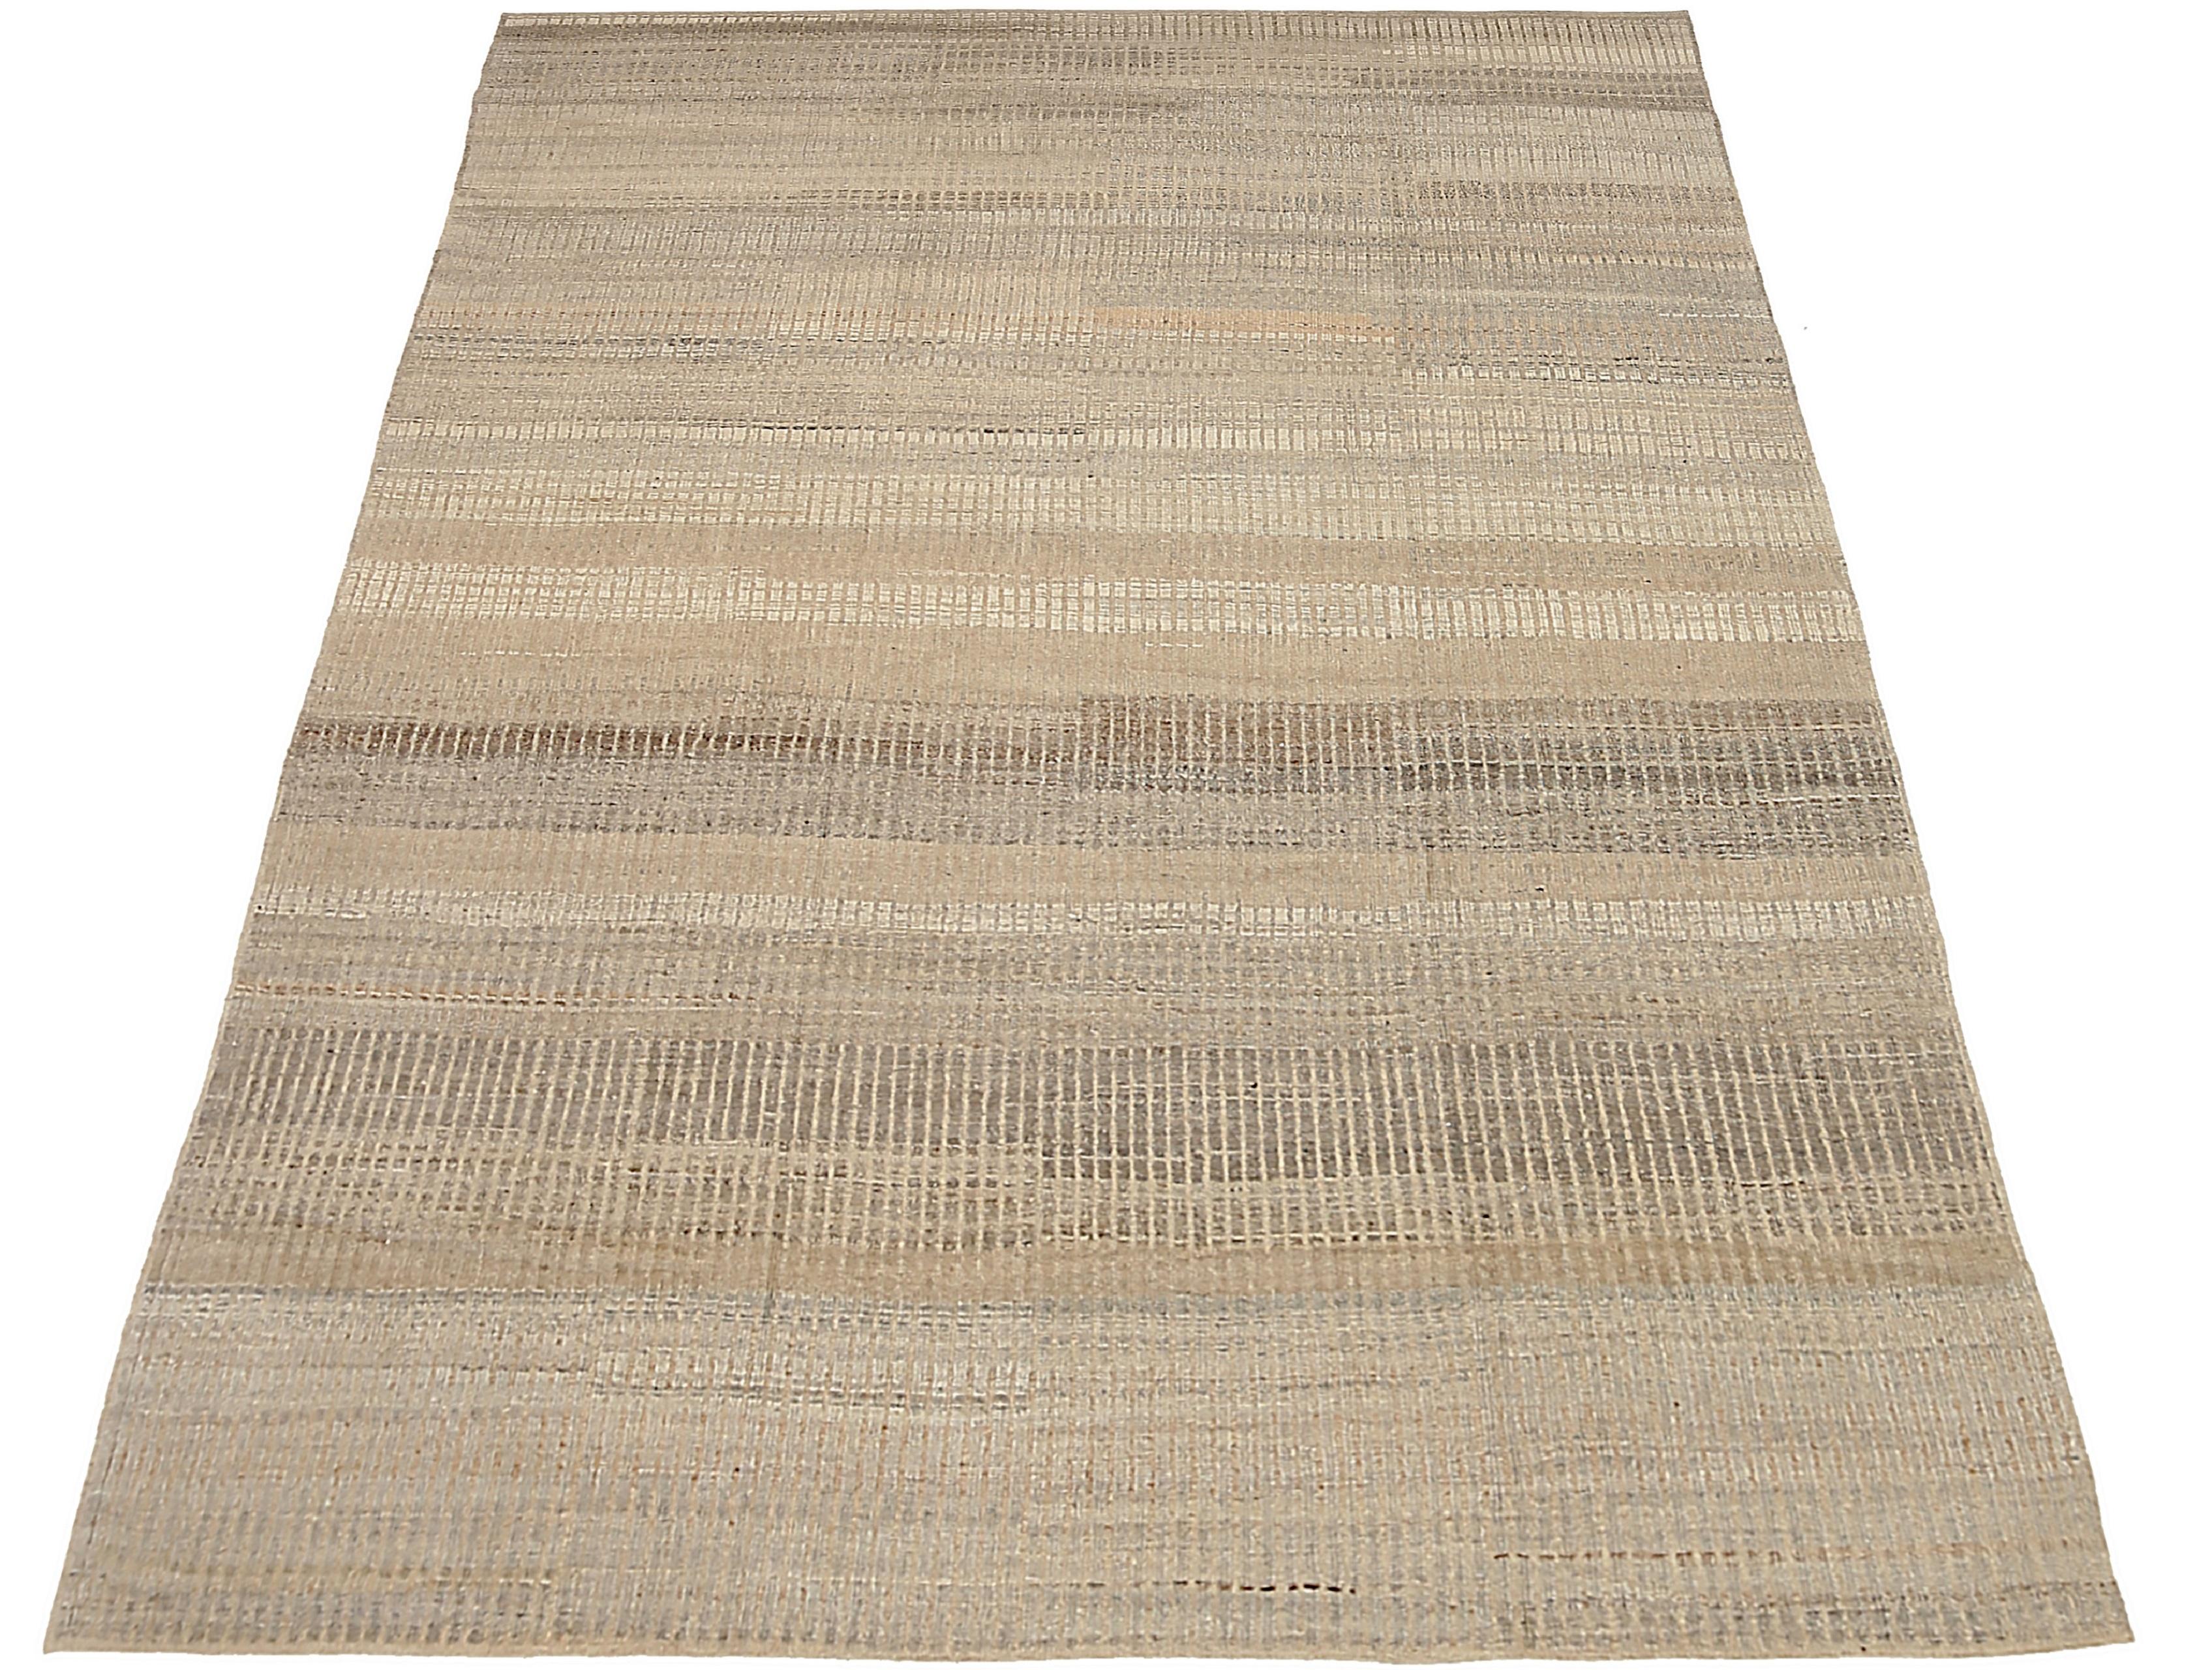 Beautiful Taupe Textured Modern Distressed Rug, Country of Origin: Afghanistan, Circa Date: Modern. Size: 9 ft 2 in x 12 ft 1 in (2.79 m x 3.68 m)